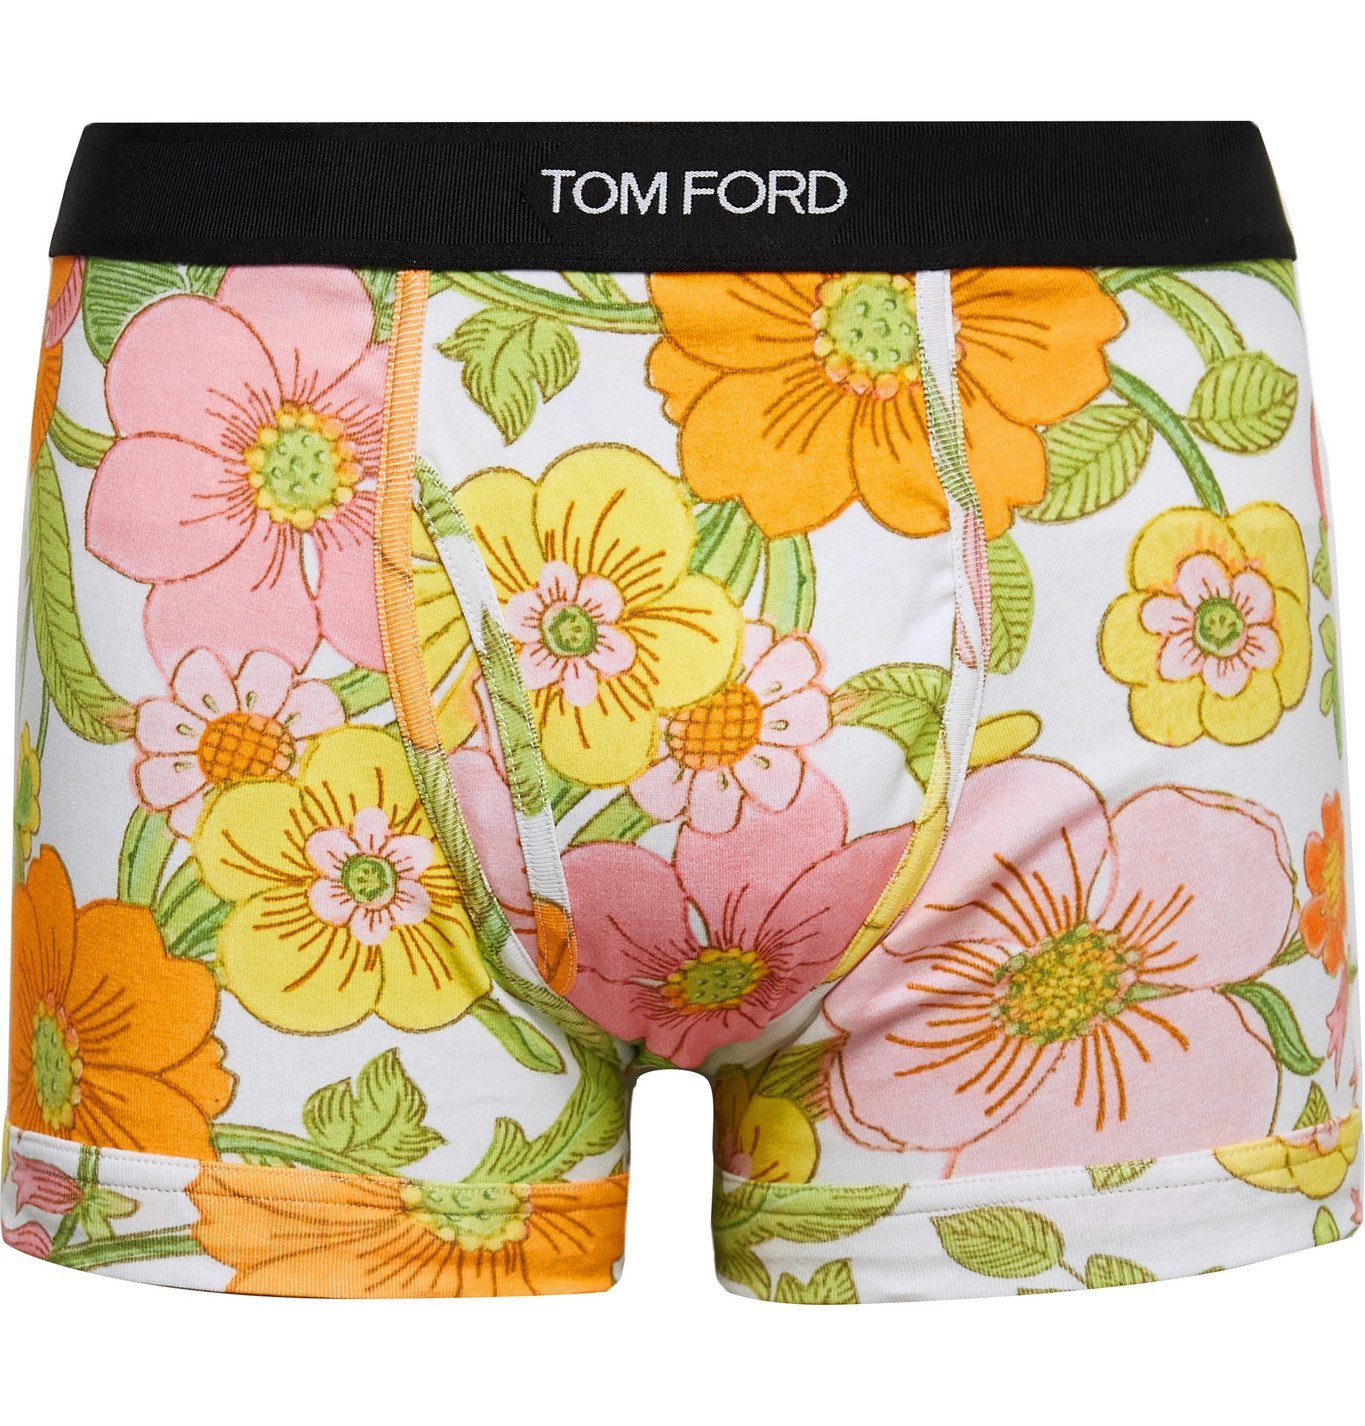 TOM FORD - Floral-Print Stretch-Cotton Jersey Boxer Briefs - Pink TOM FORD